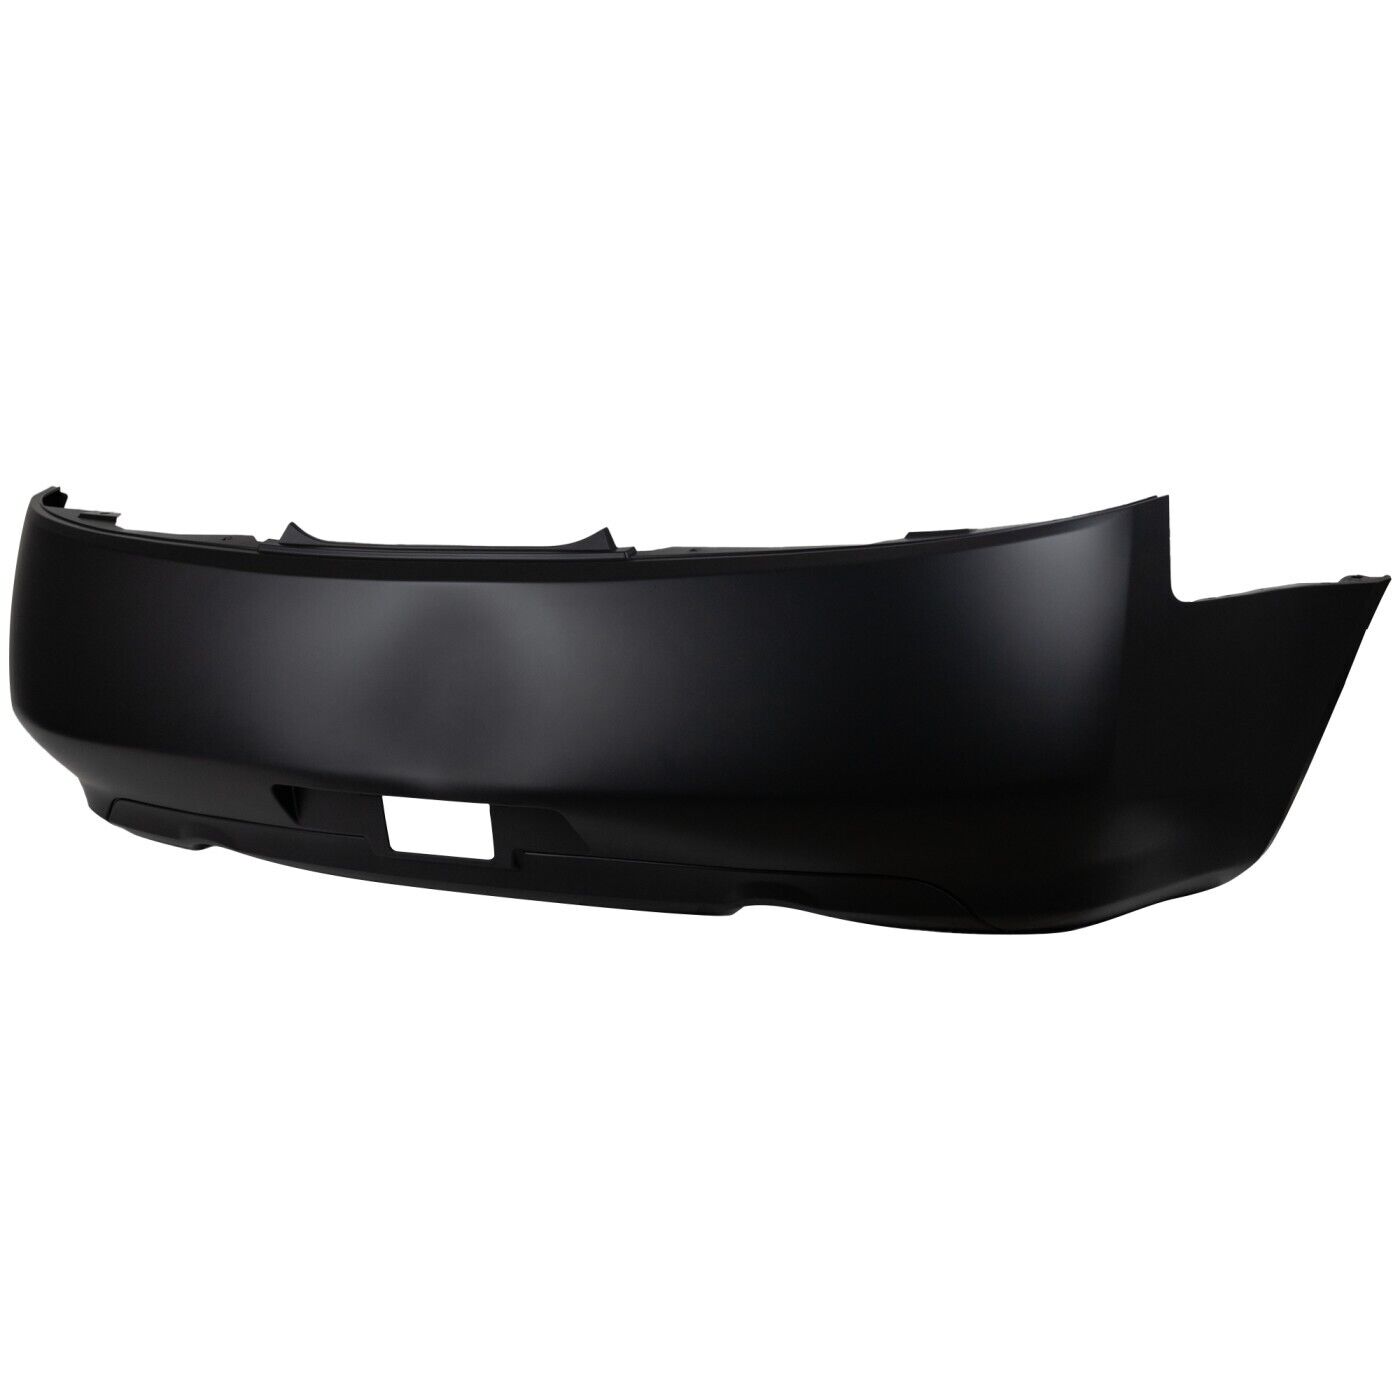 Rear Bumper Cover For 2003-2007 Infiniti G35 Coupe Primed